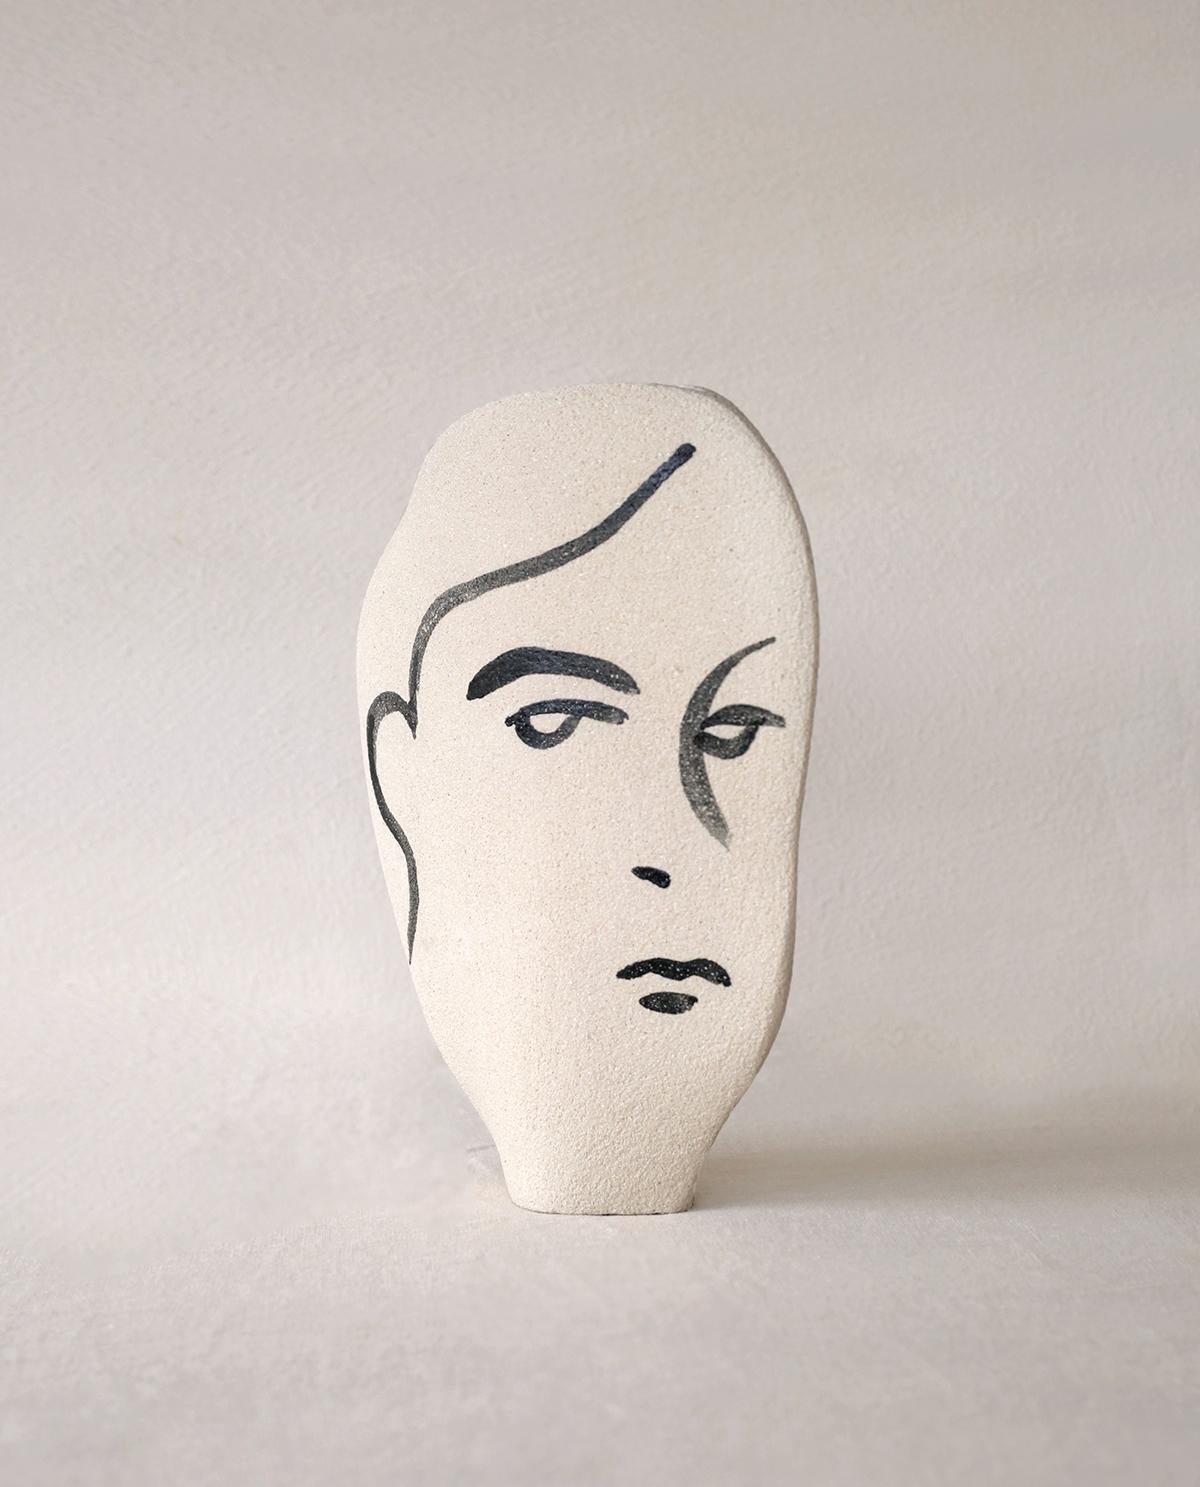 ‘Frida N°1’ Handmade Ceramic White Vase

This vase is part of a new series inspired by human faces and portrait illustrations. Here is a new shaped model, the ‘Frida N°1', with hand-painted figurative motifs applied with a brush before the first